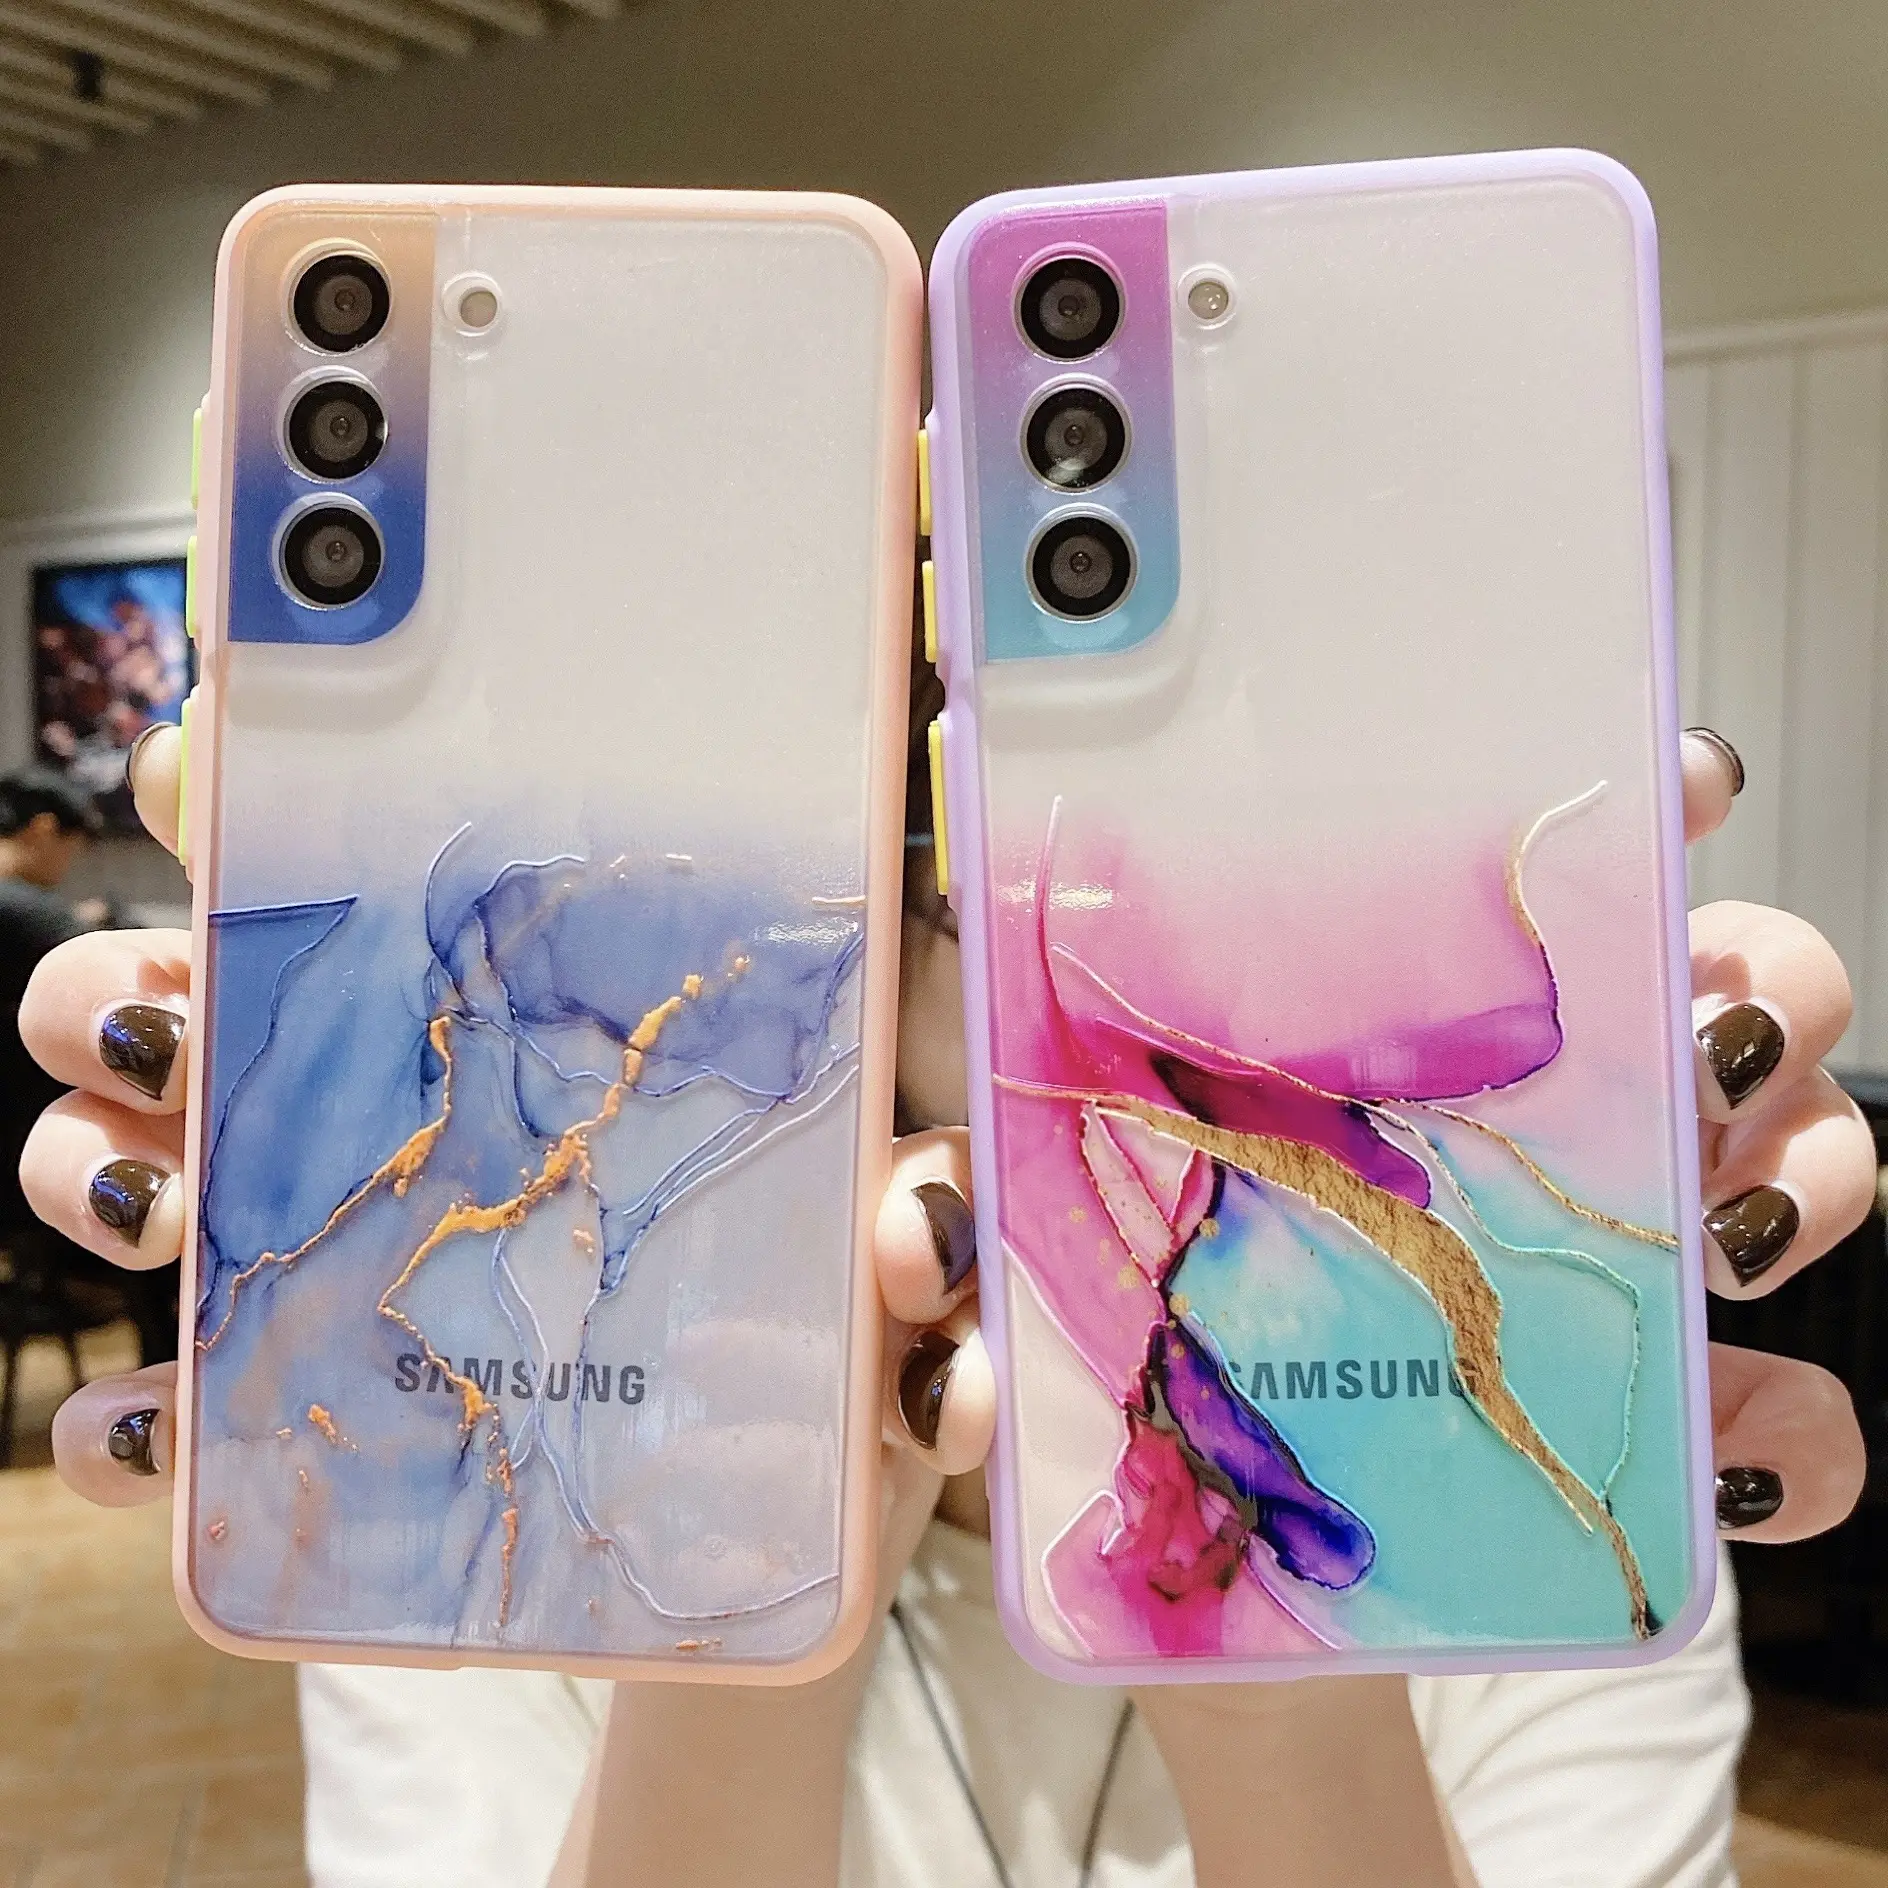 New Design Gradient Watercolor Marble Painting Mobile Phone Case For Samsung Galaxy S21 Ultra Note 20 Plus A52 A32 A42 A72